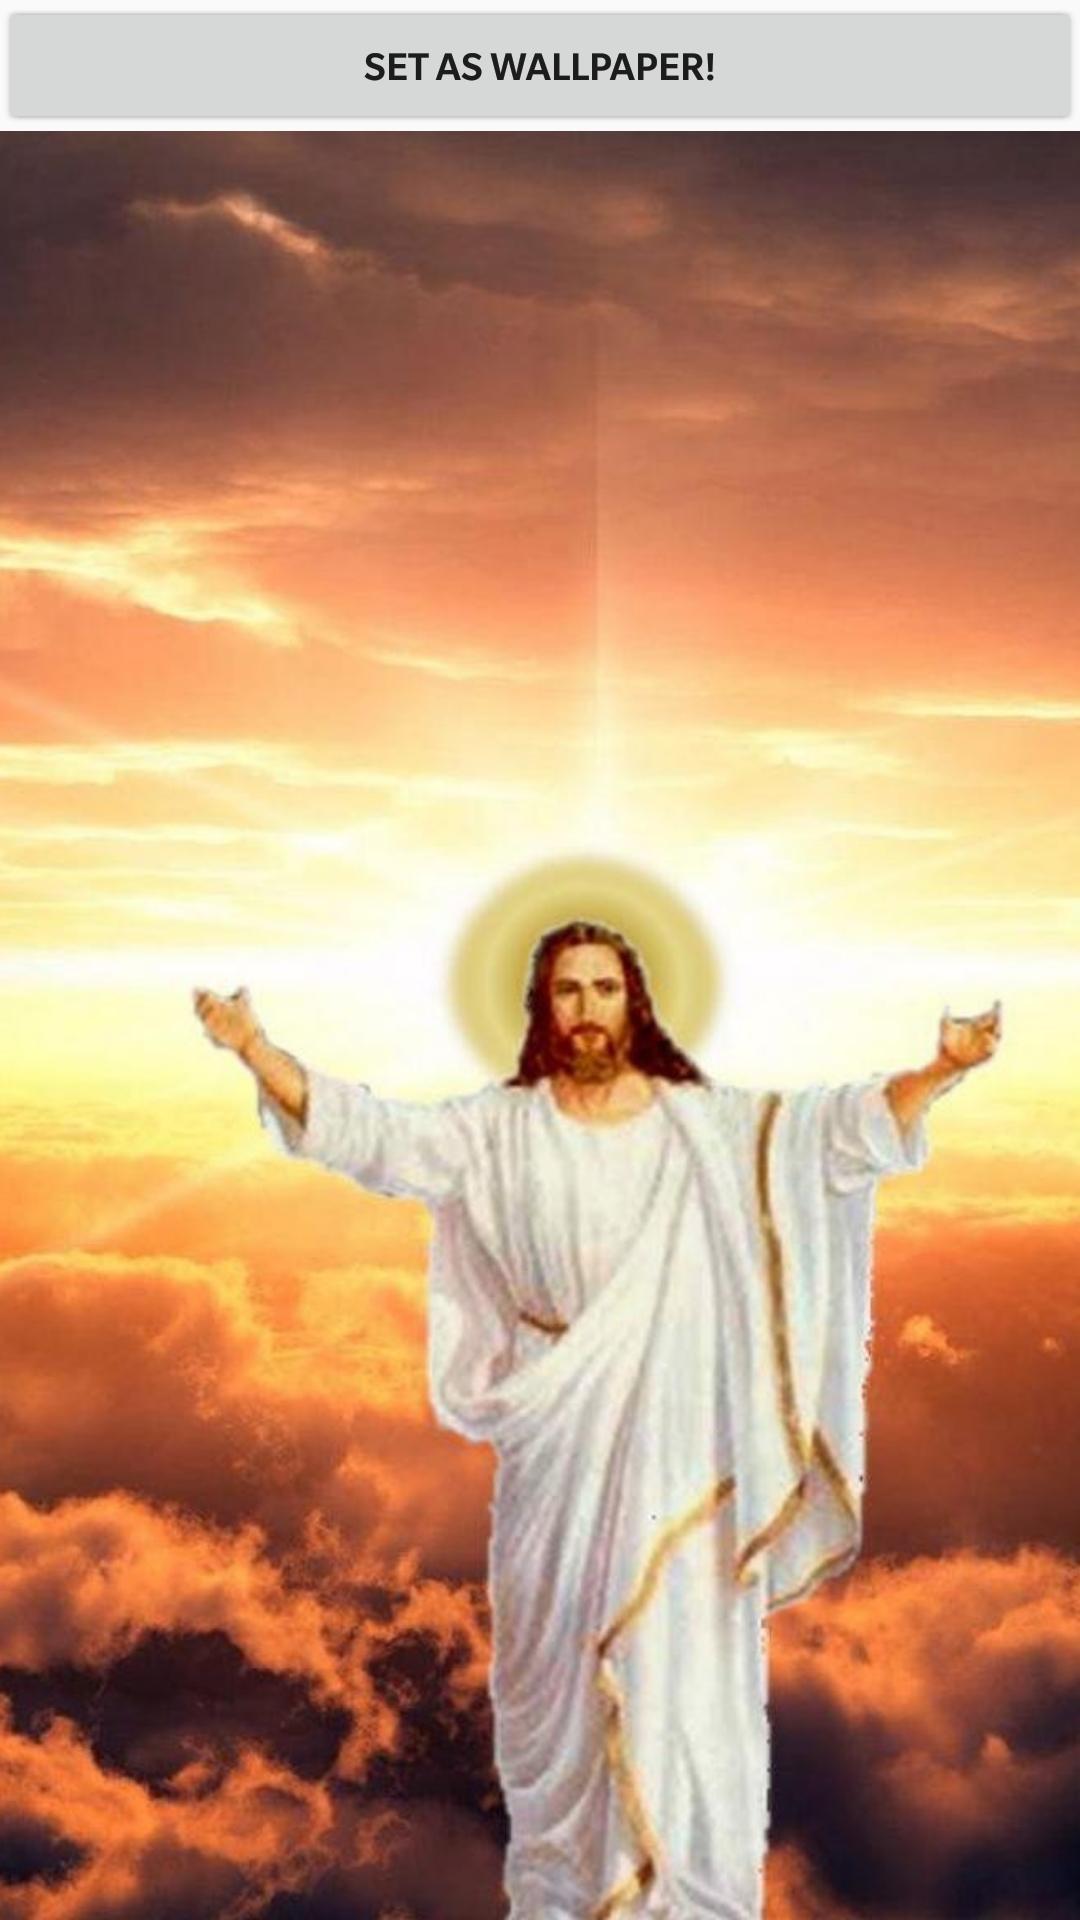  Jesus  Wallpaper  HD  2021 for Android  APK Download